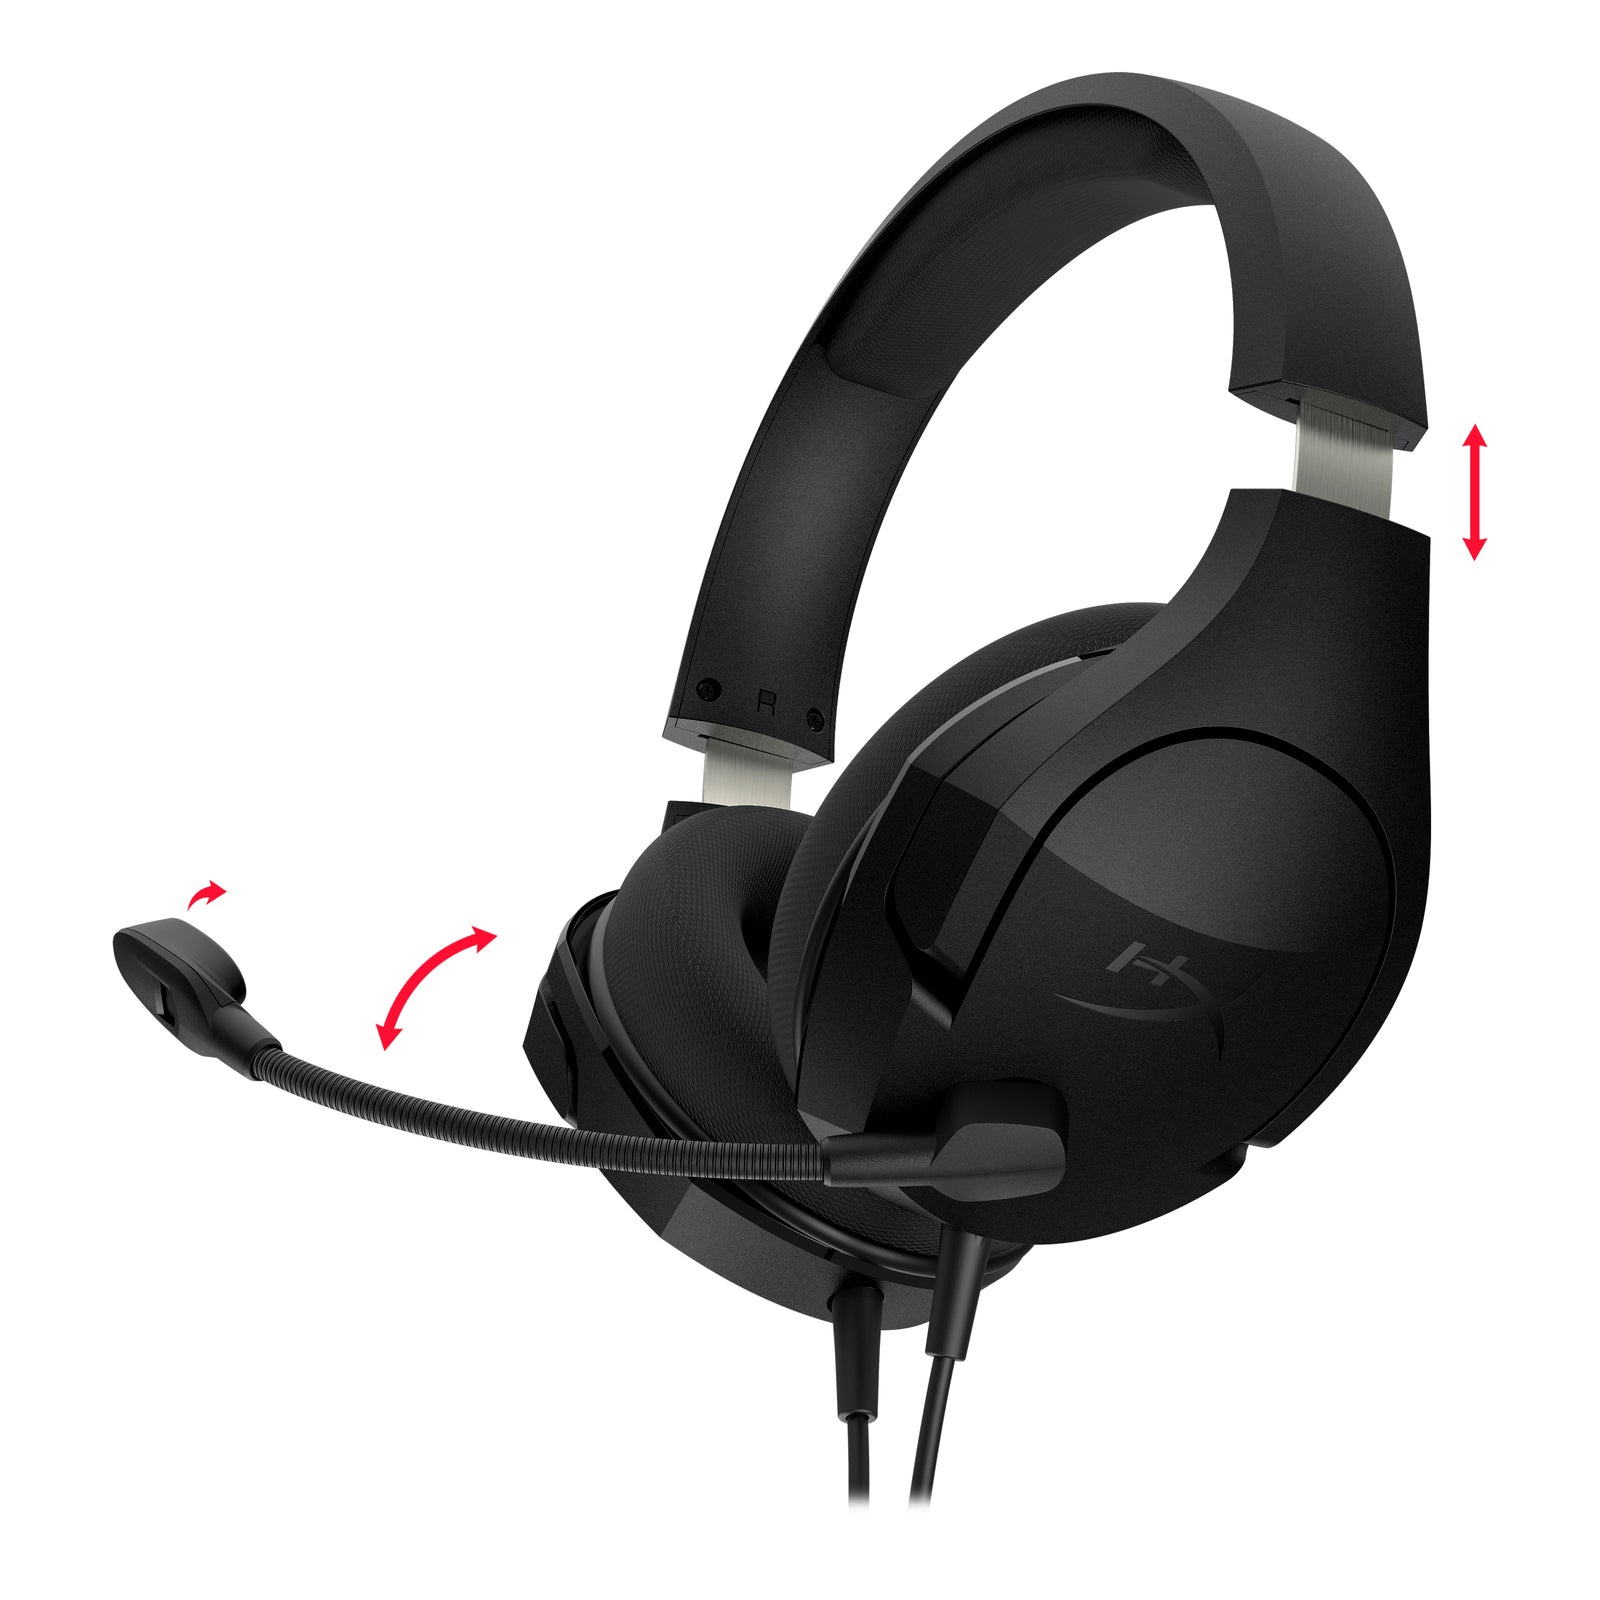 HyperX Cloud Stinger Core – Wireless Lightweight Gaming Headset, DTS  Headphone:X spatial audio, Noise Cancelling Microphone, For PC, Black